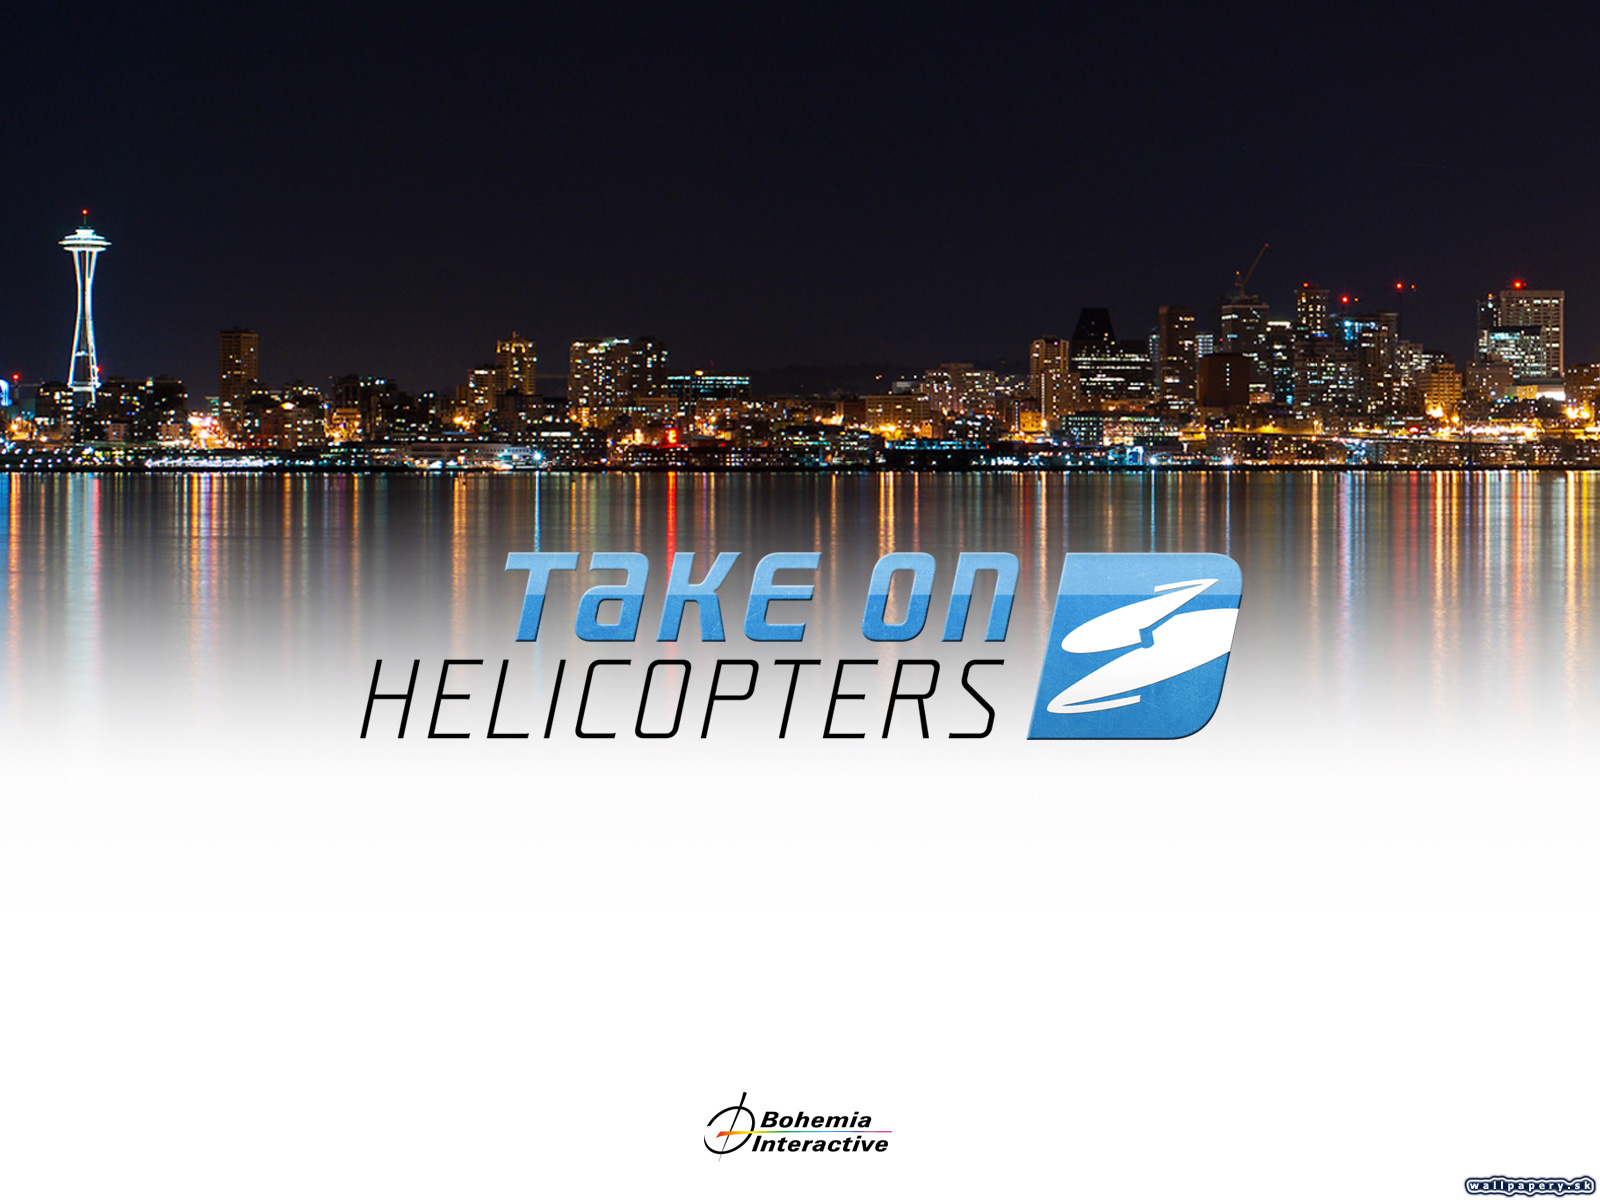 Take On Helicopters - wallpaper 4